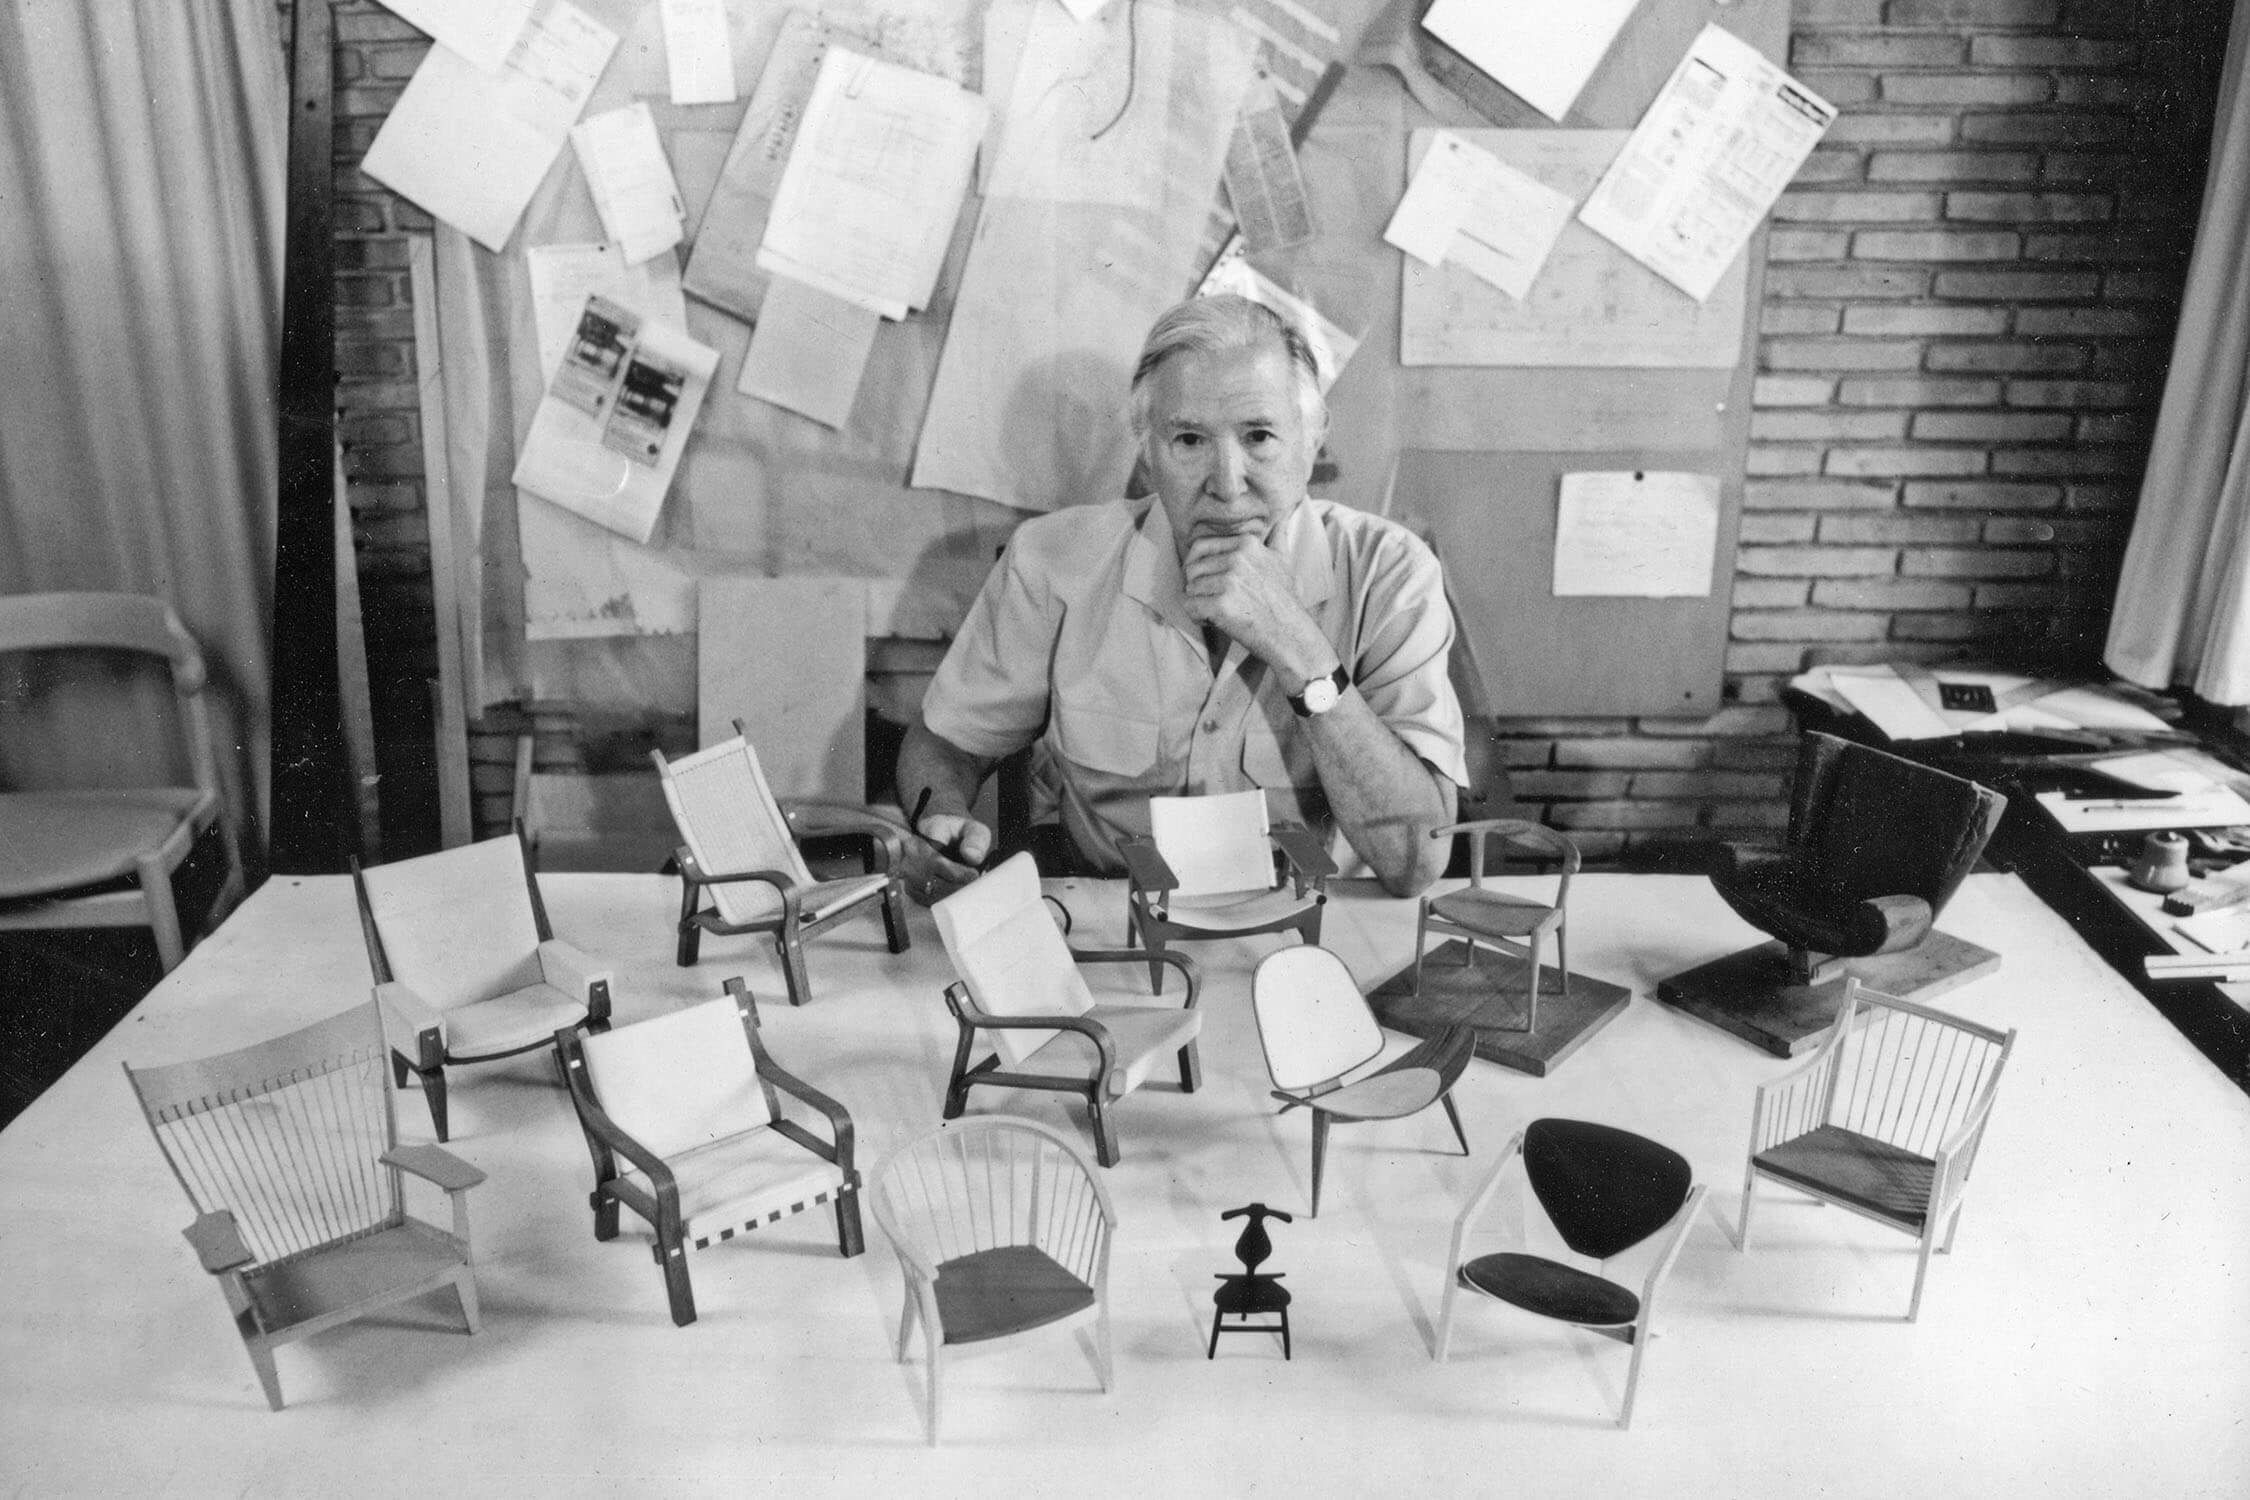 Designer Hans J. Wegner with chair models spread on a table in front of him